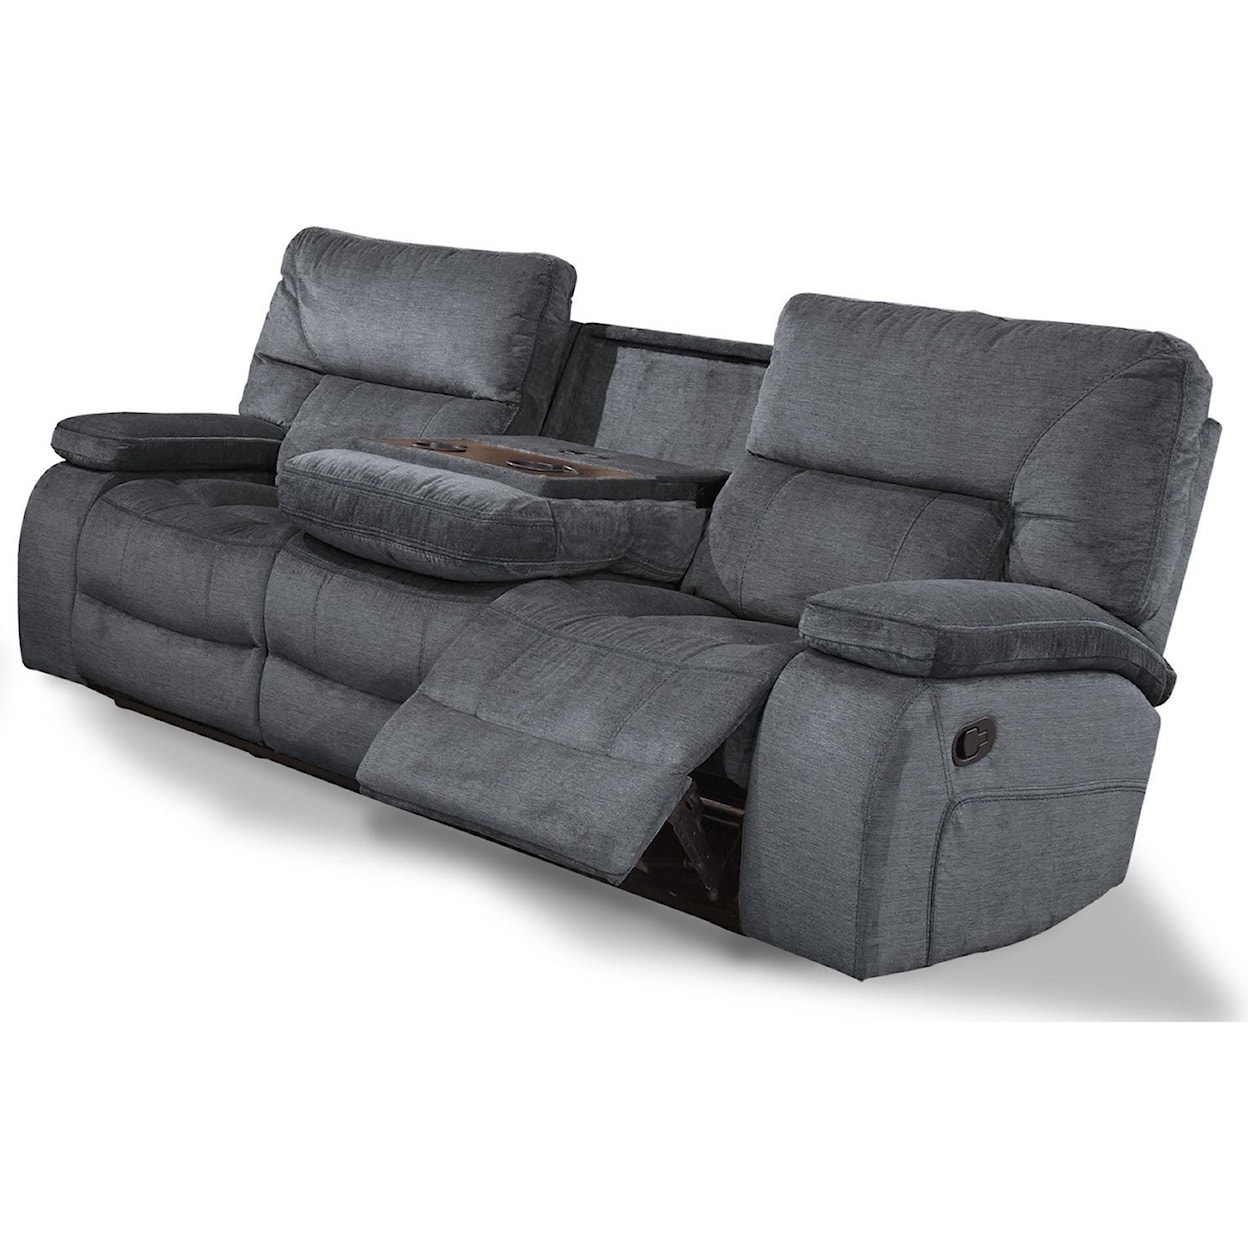 Parker Living Chapman Dual Reclining Sofa with Drop Down Console